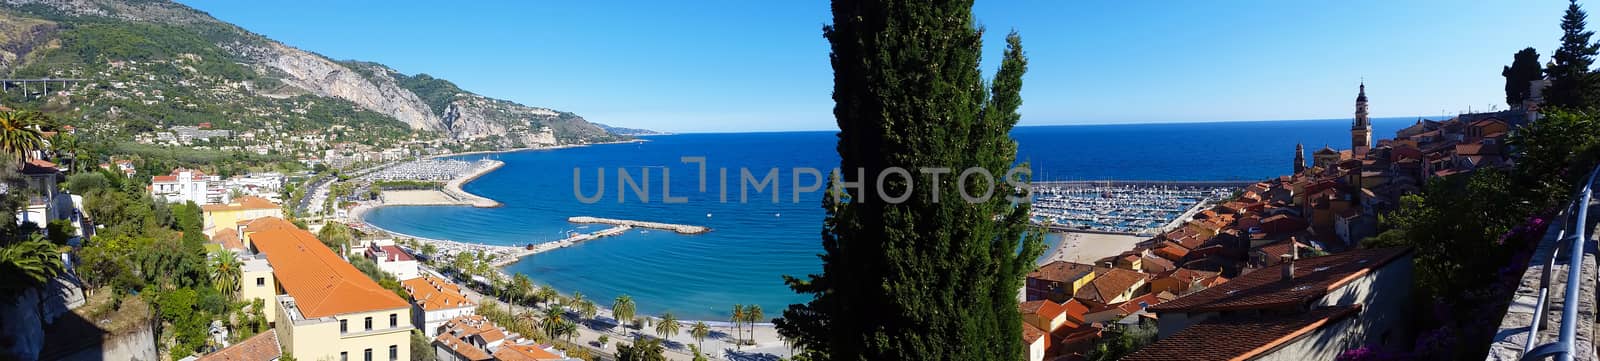 Beautiful Panoramic View of the City of Menton and the Mediterranean Sea